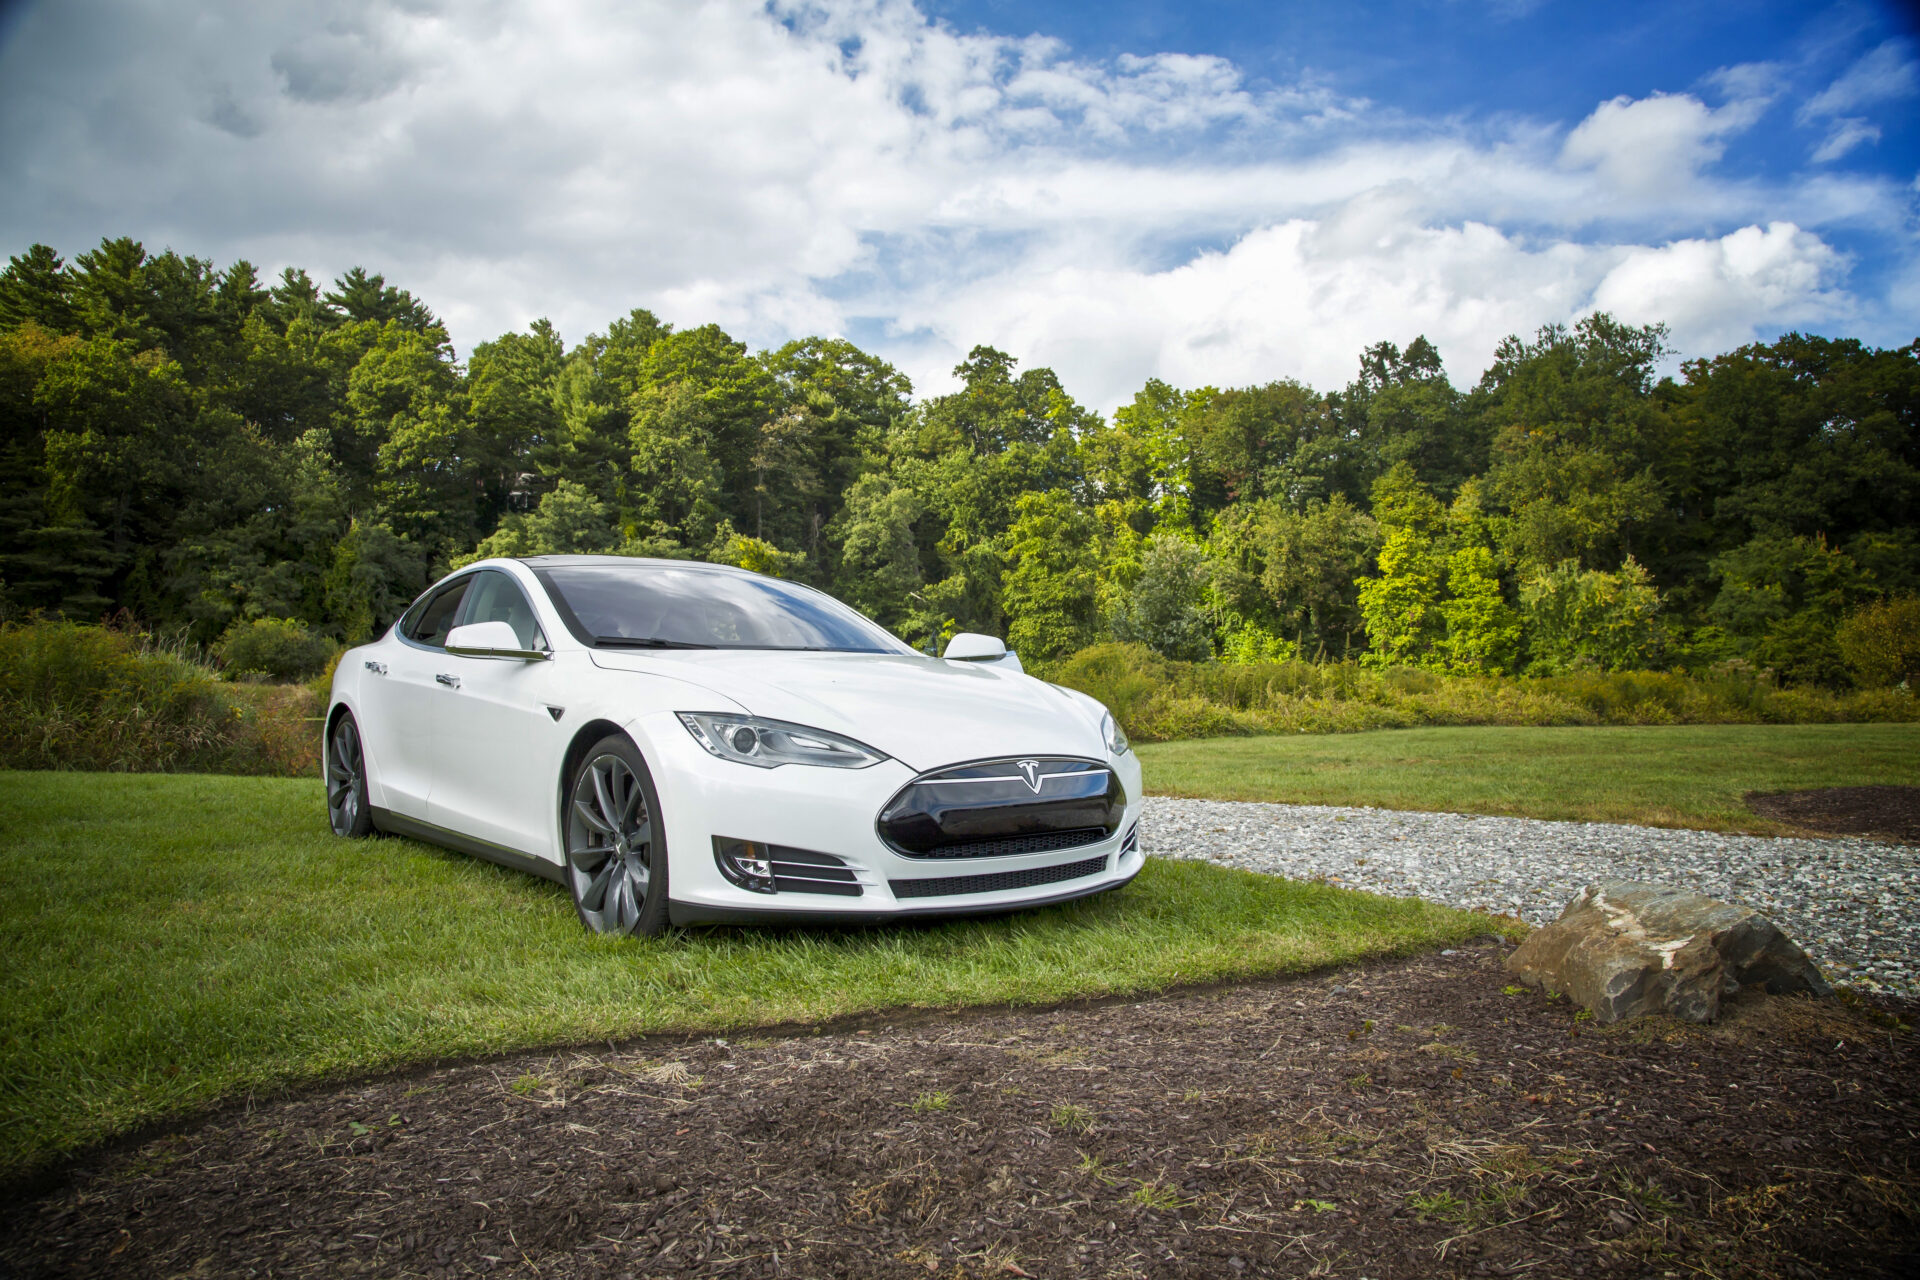 A Tesla electric vehicle is parked on a grassy area next to a gravel road with evergreen trees and blue sky behind it. Photo courtesy of Tesla